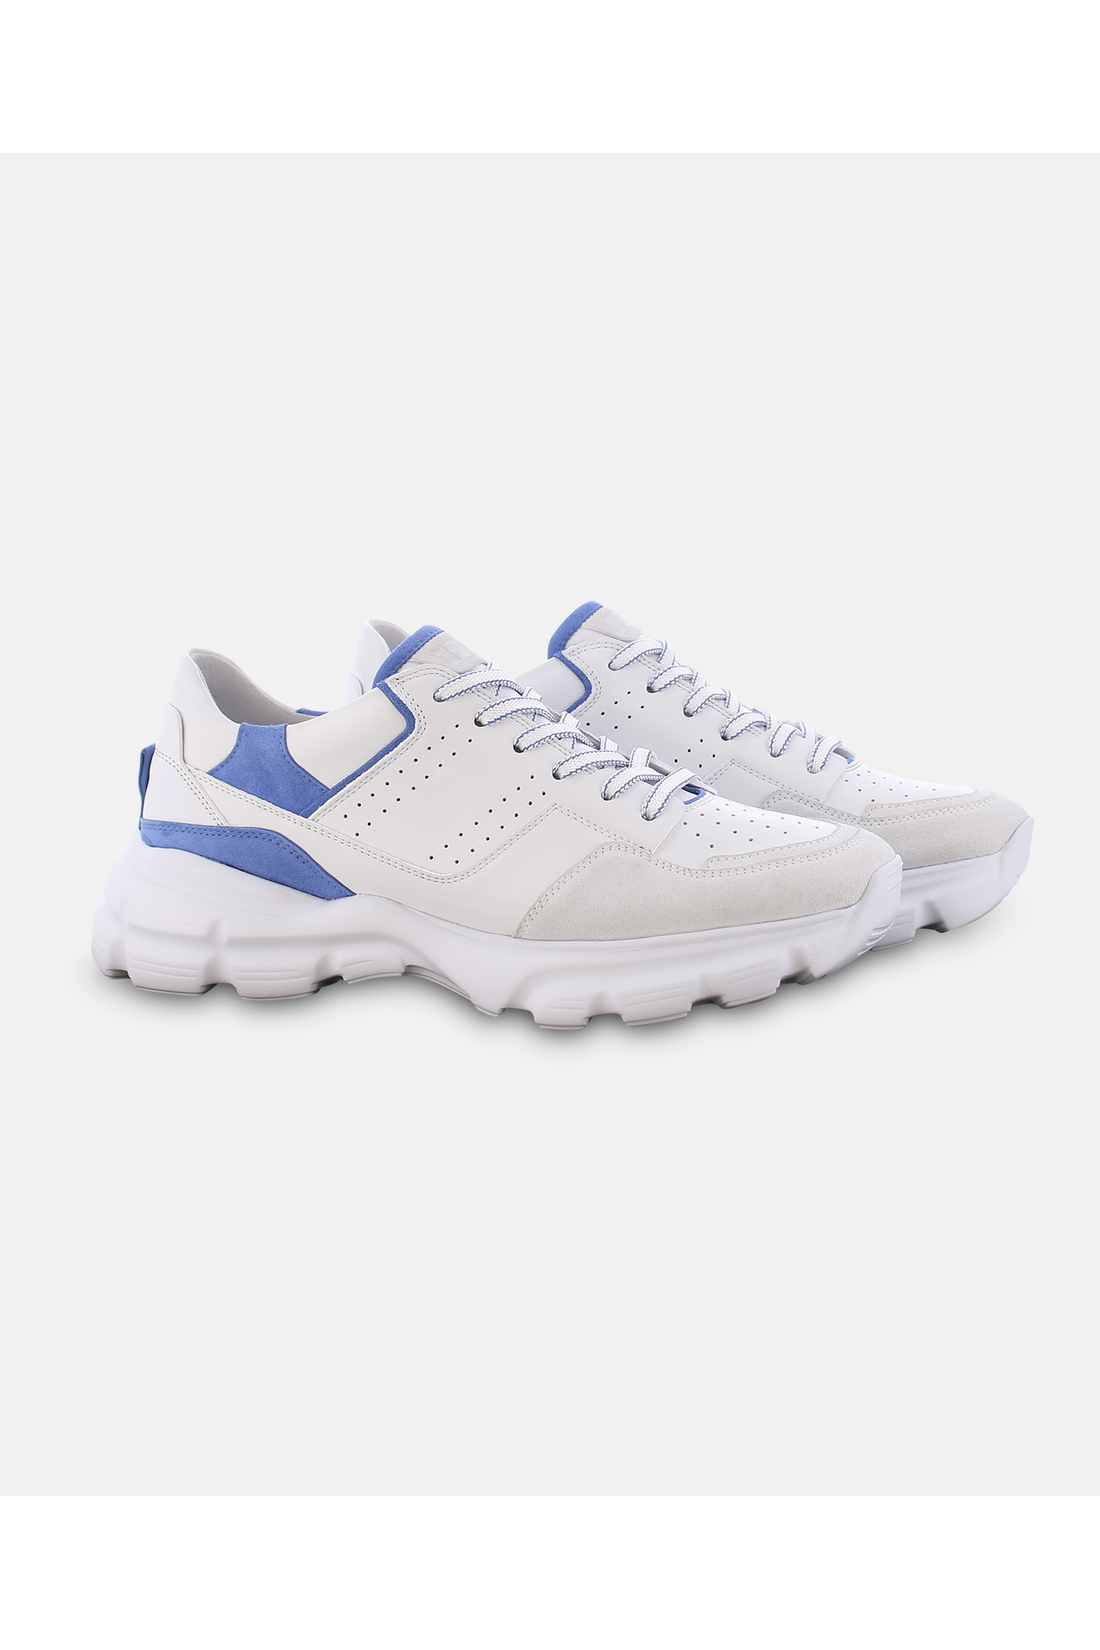 Kennel-Schmenger-OUTLET-SALE-FEVER-Sneakers-2_5-35-Weiss-ARCHIVE-COLLECTION_5e85783d-4b2f-4146-8479-61ba1a15a11a.png